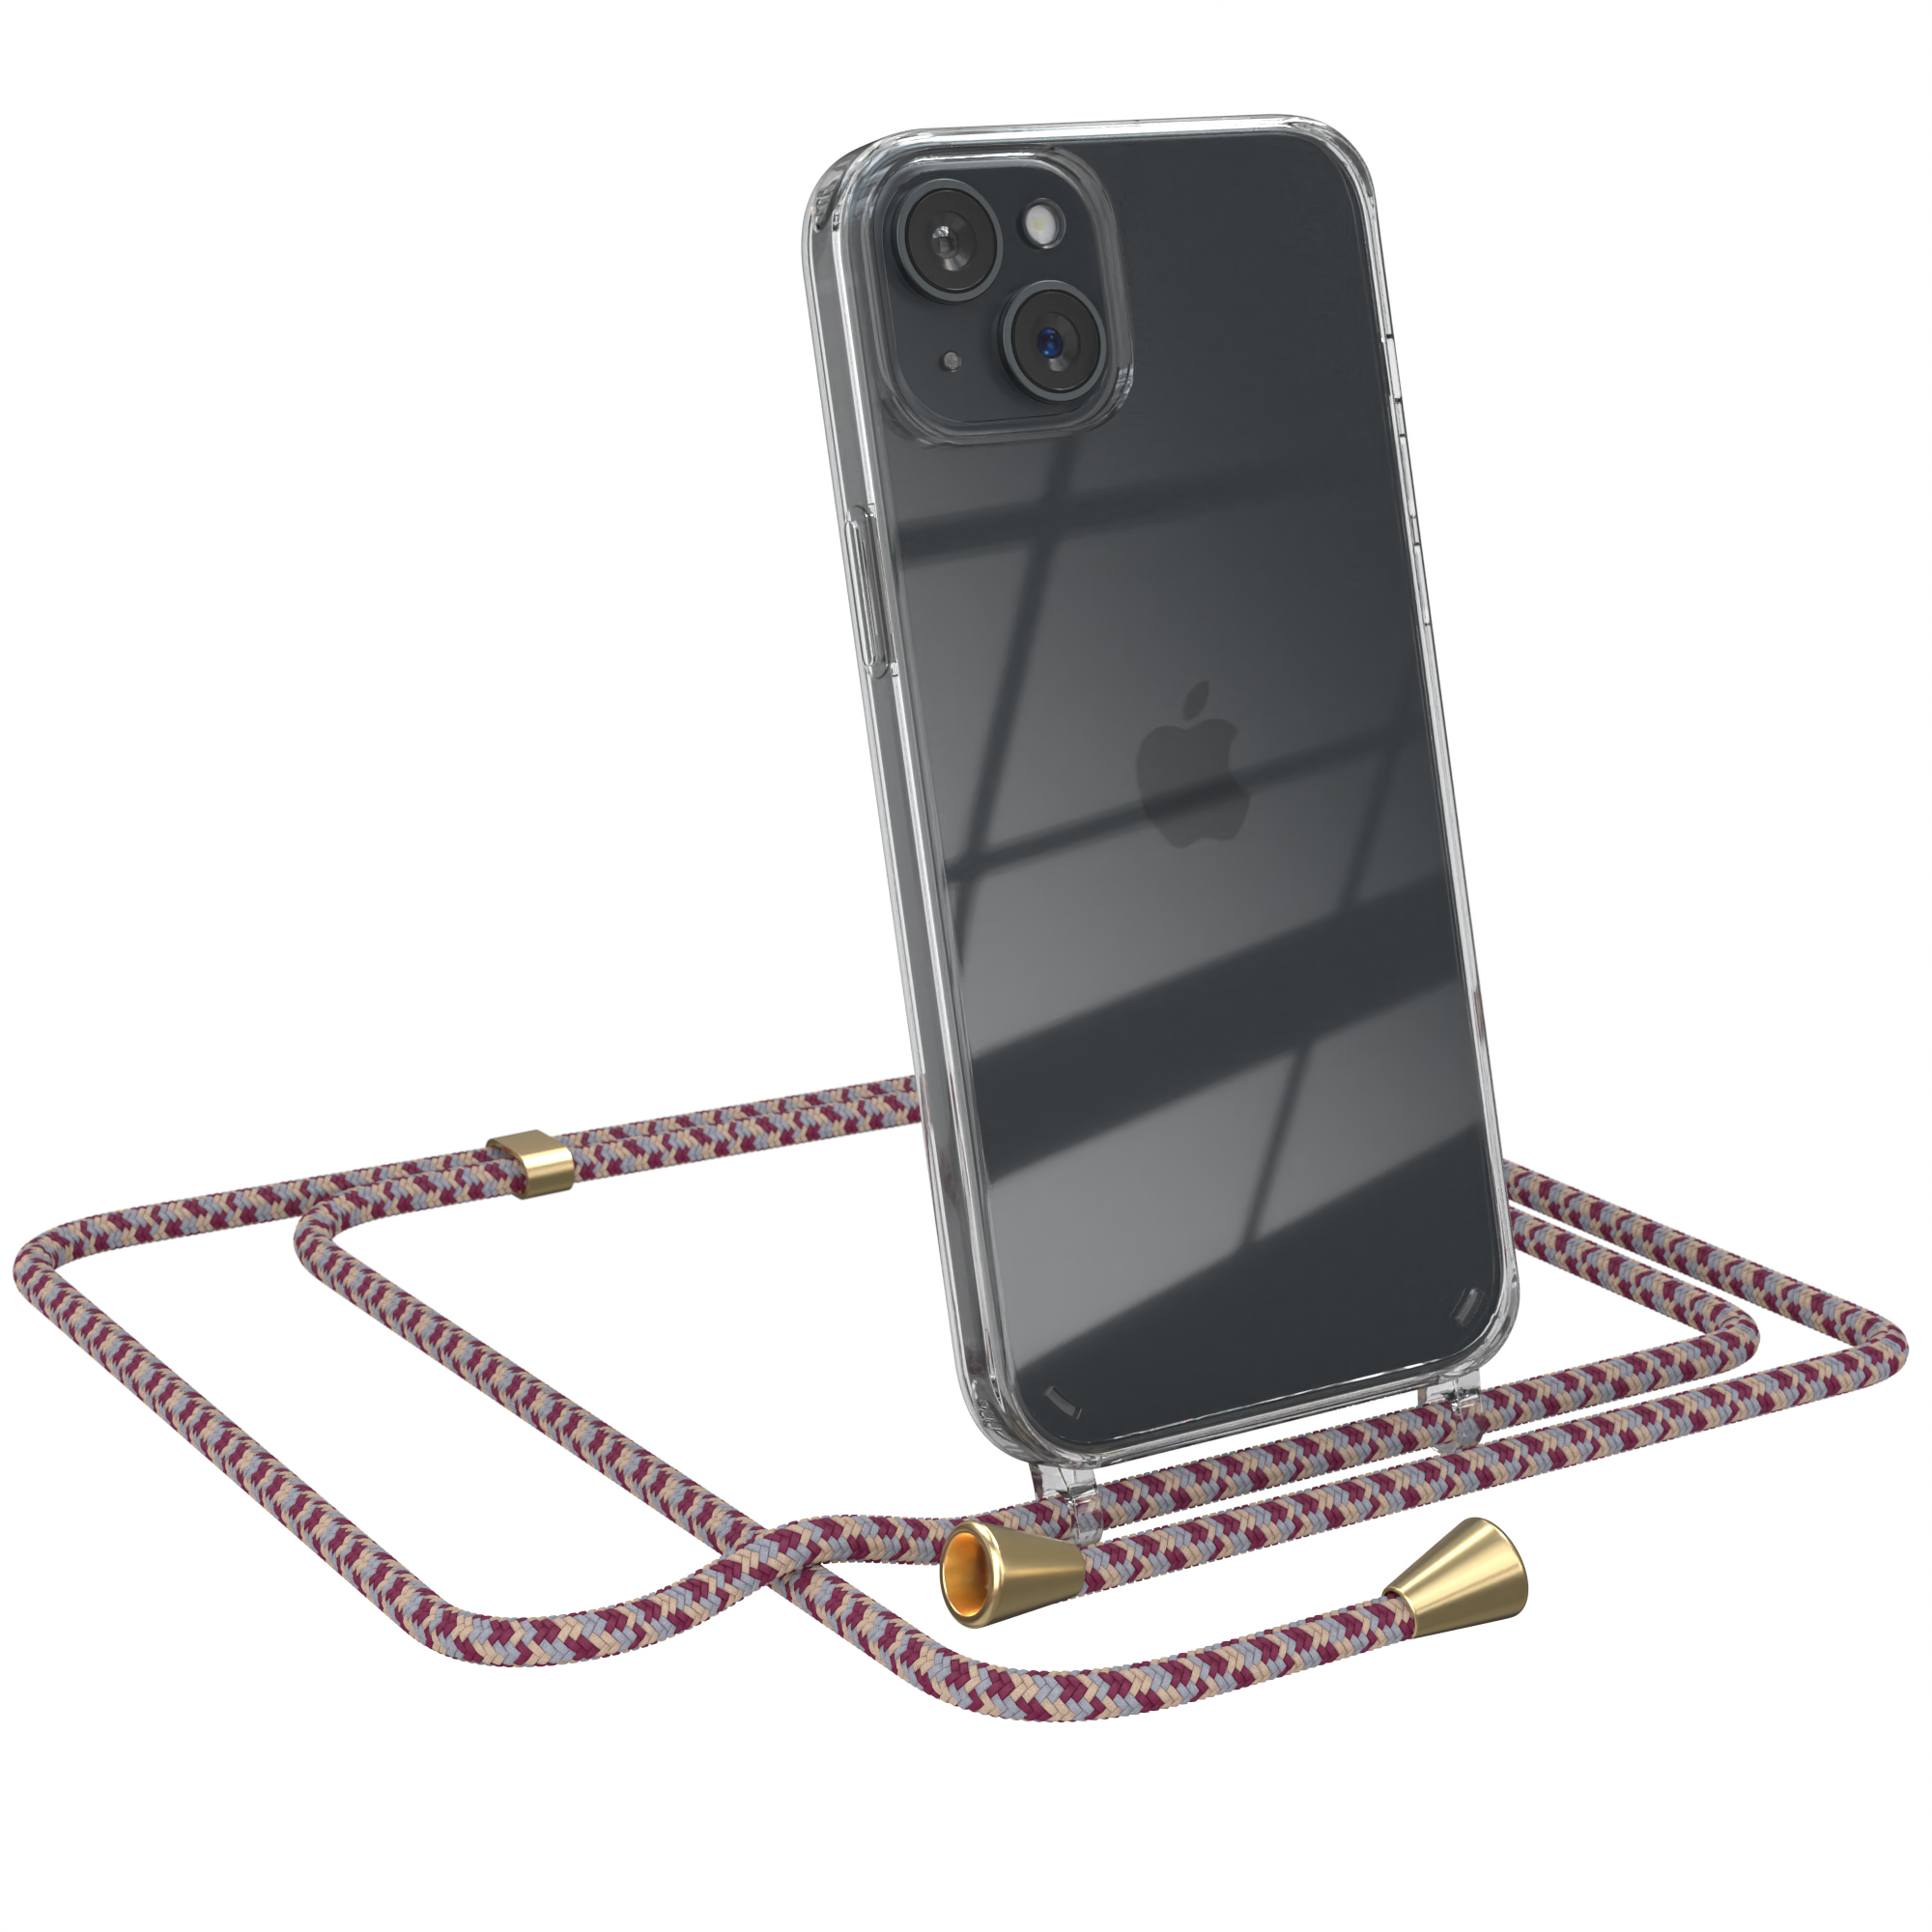 Plus, 15 Gold CASE Clips EAZY Clear iPhone mit Rot Beige Apple, Cover Camouflage Umhängeband, / Umhängetasche,